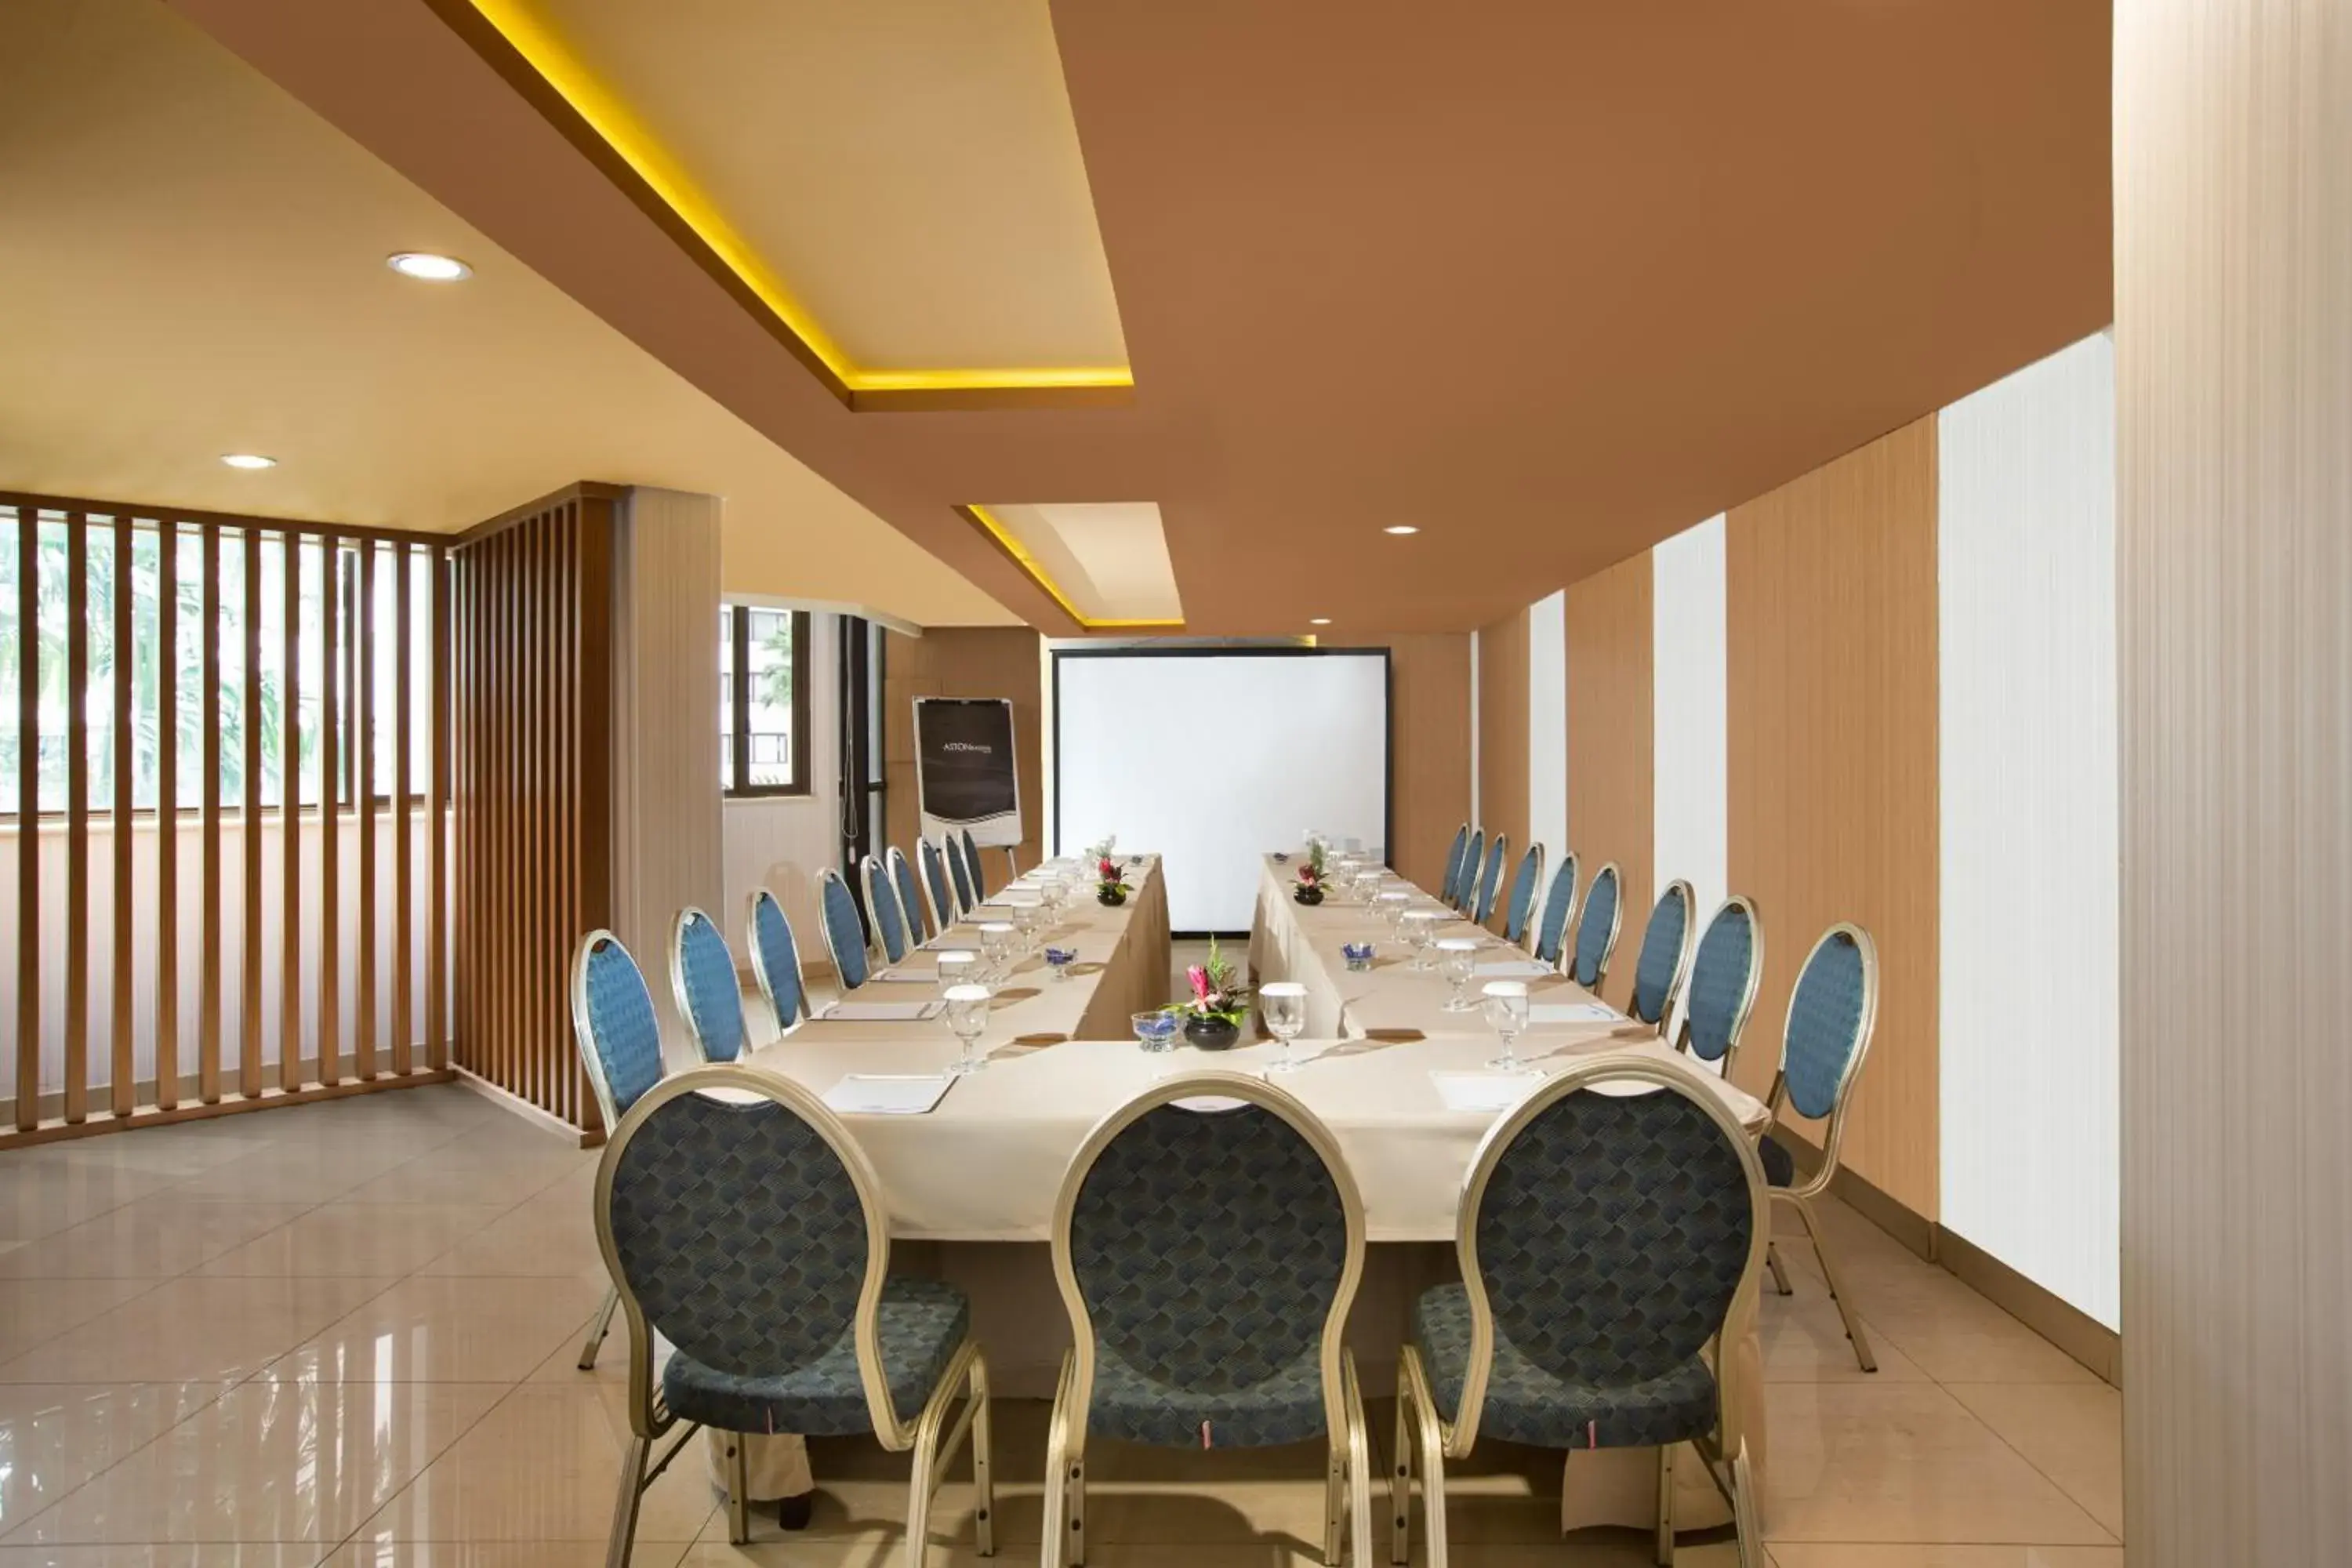 Meeting/conference room in Horison Suite Residences Rasuna Jakarta